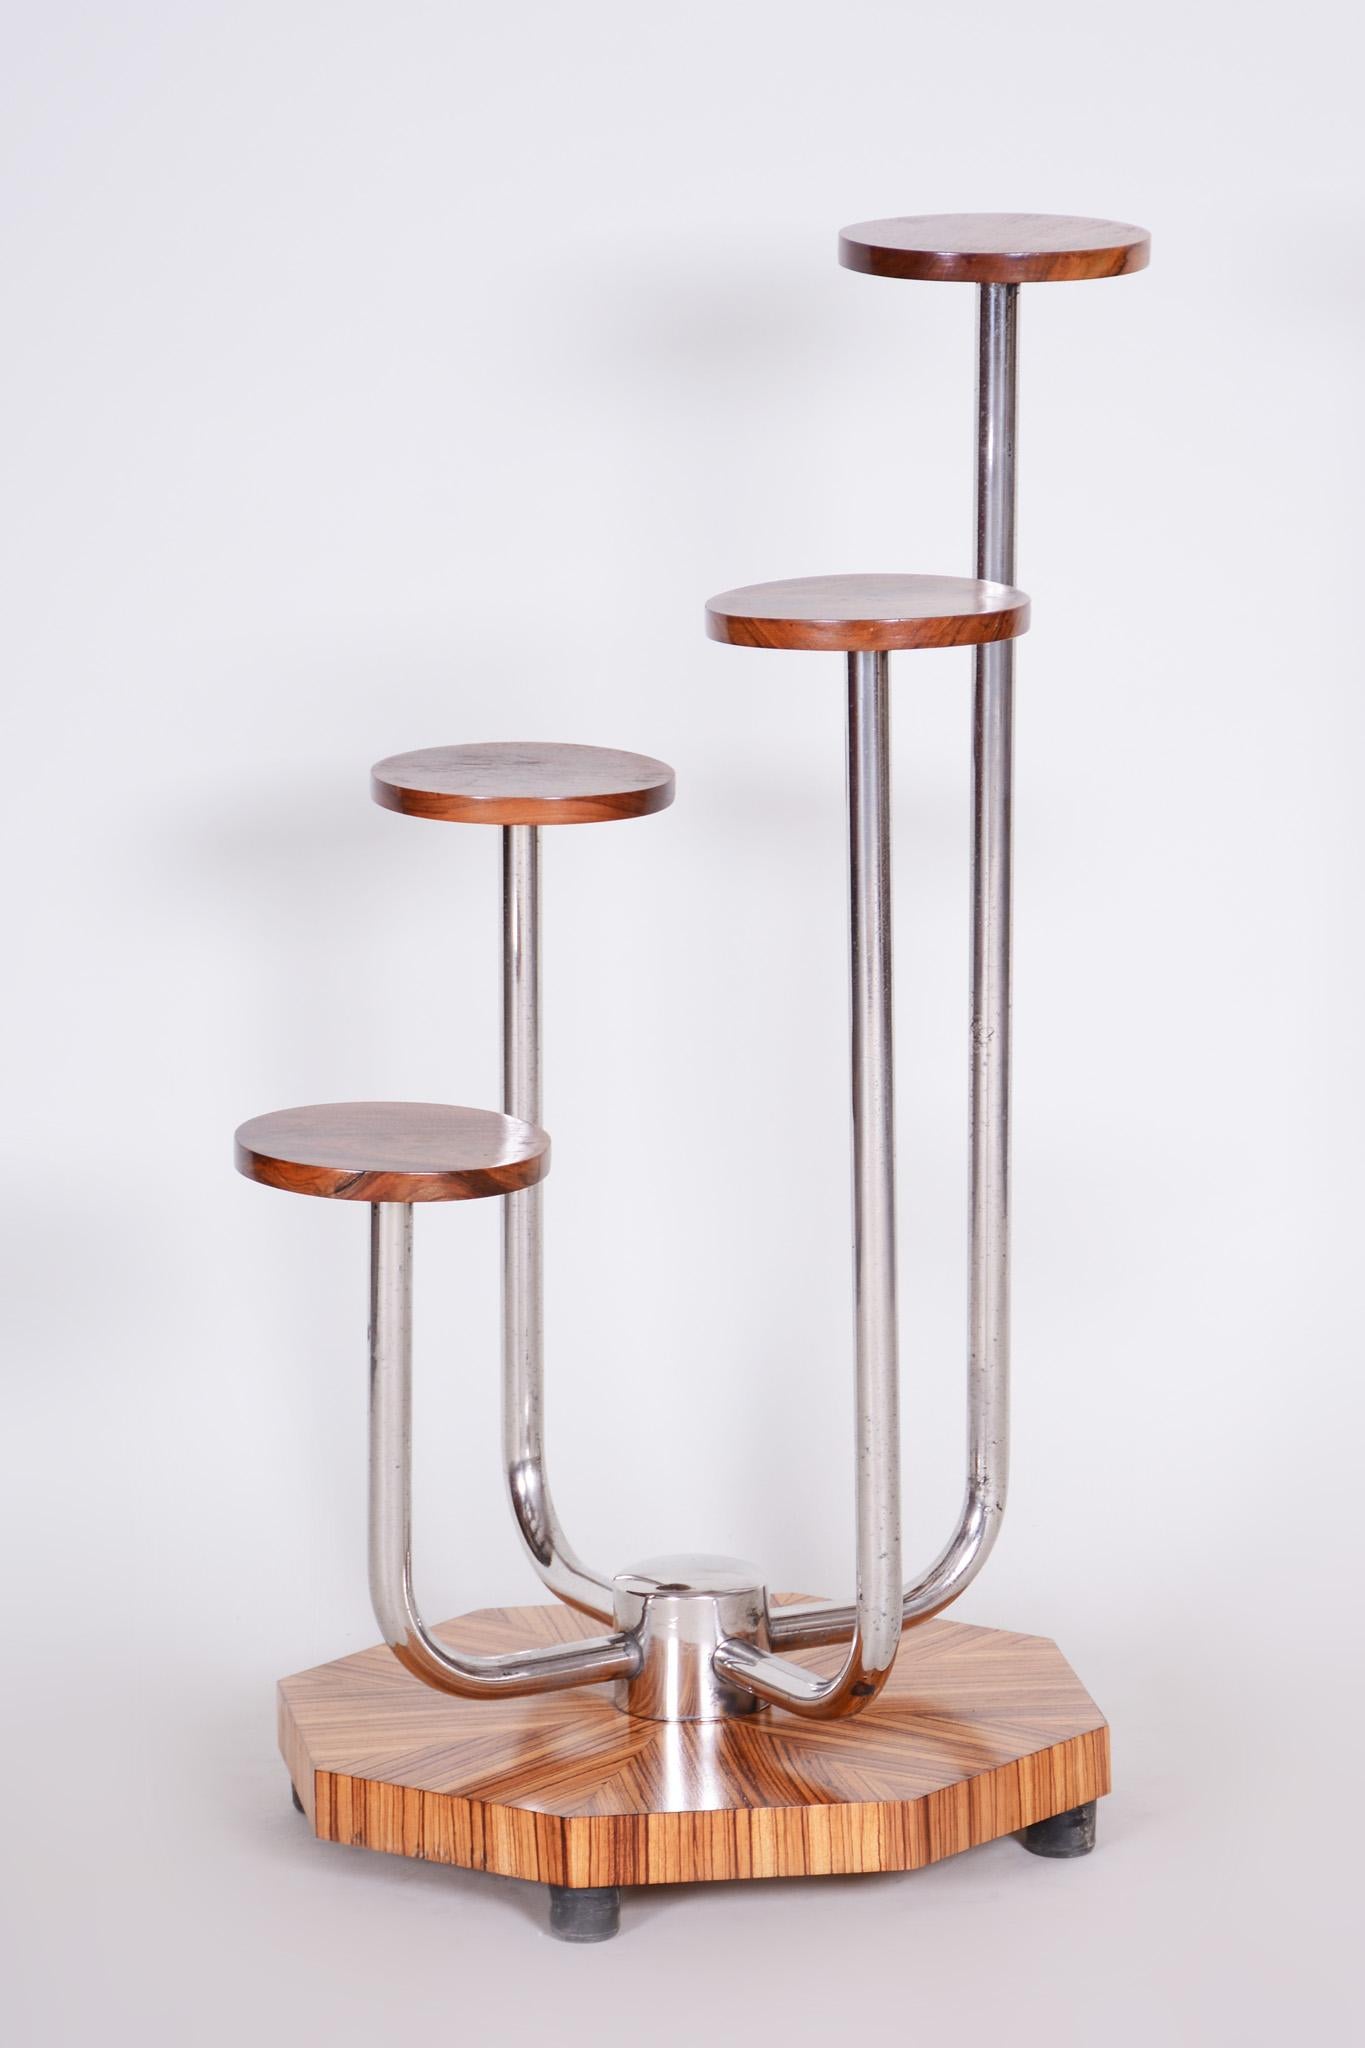 Czech Brown Bauhaus Chrome Flower Stand by Mücke, Melder, Zebrano Wood, 1930s In Good Condition For Sale In Horomerice, CZ